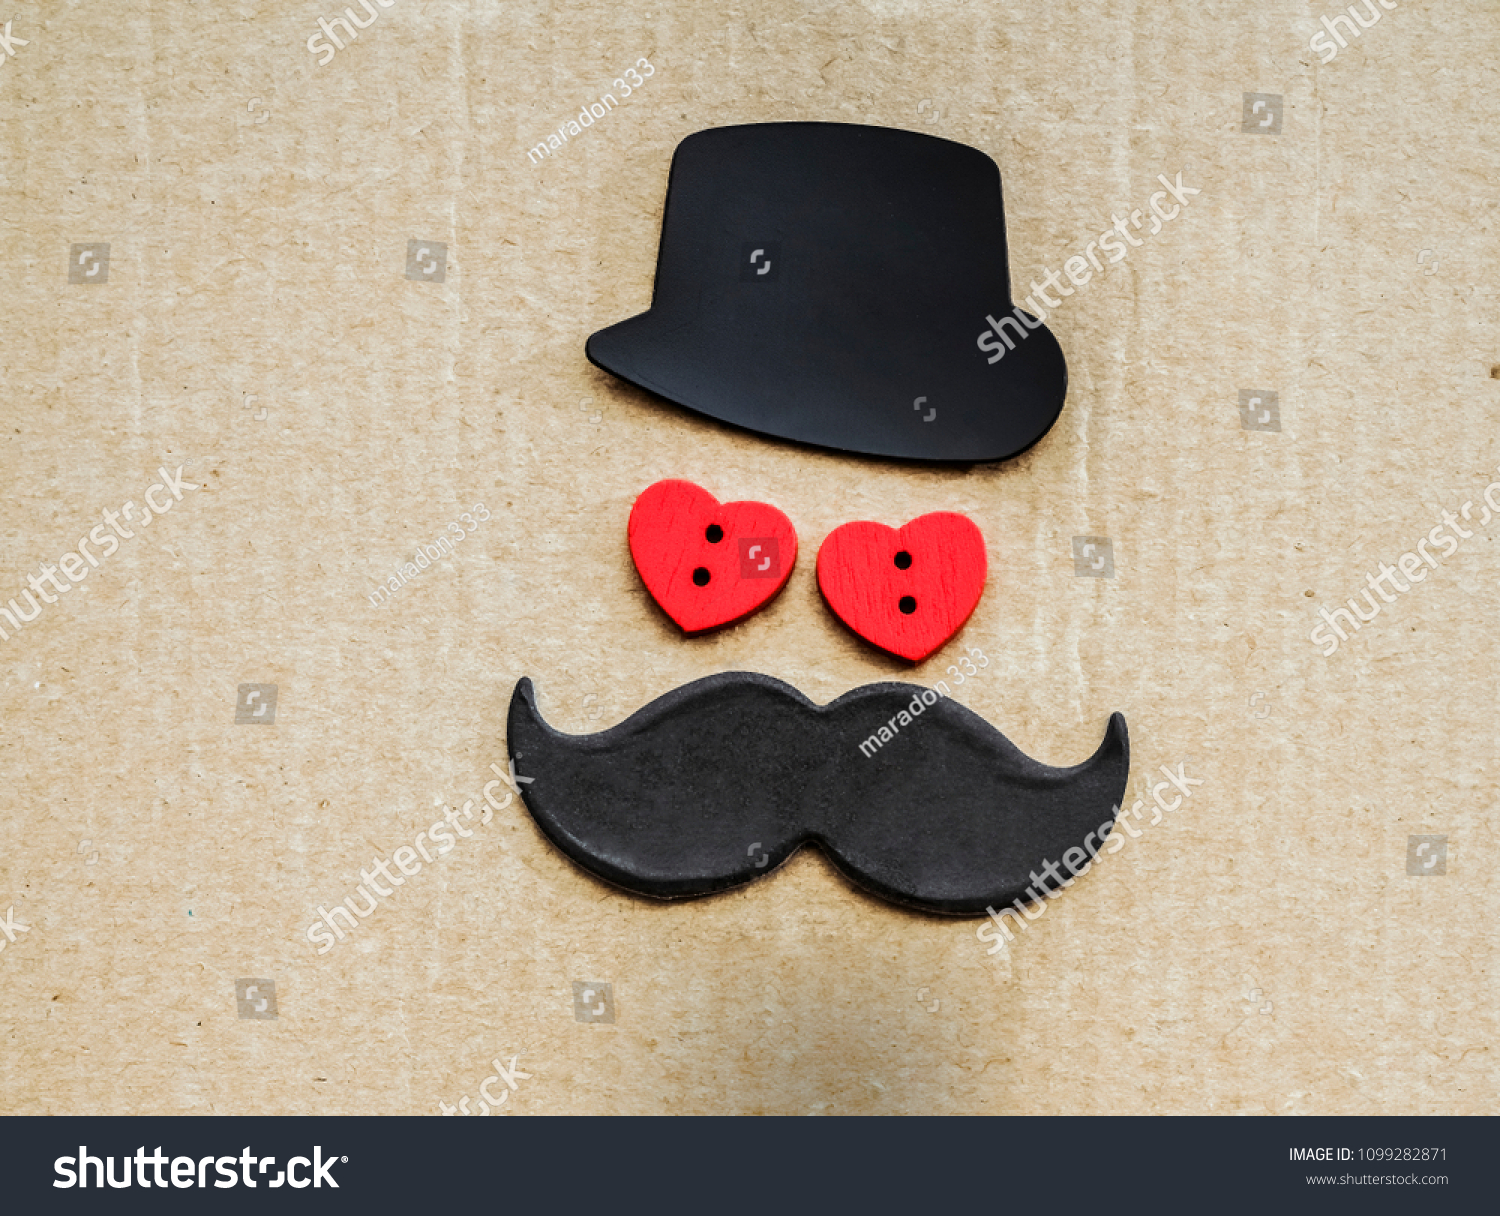 Happy Valentine's Day concept with tie, bow, hat and two red heart with facial expressions. amour lie on cartoon background. male personage. Valentines day card hearts. i love you #1099282871